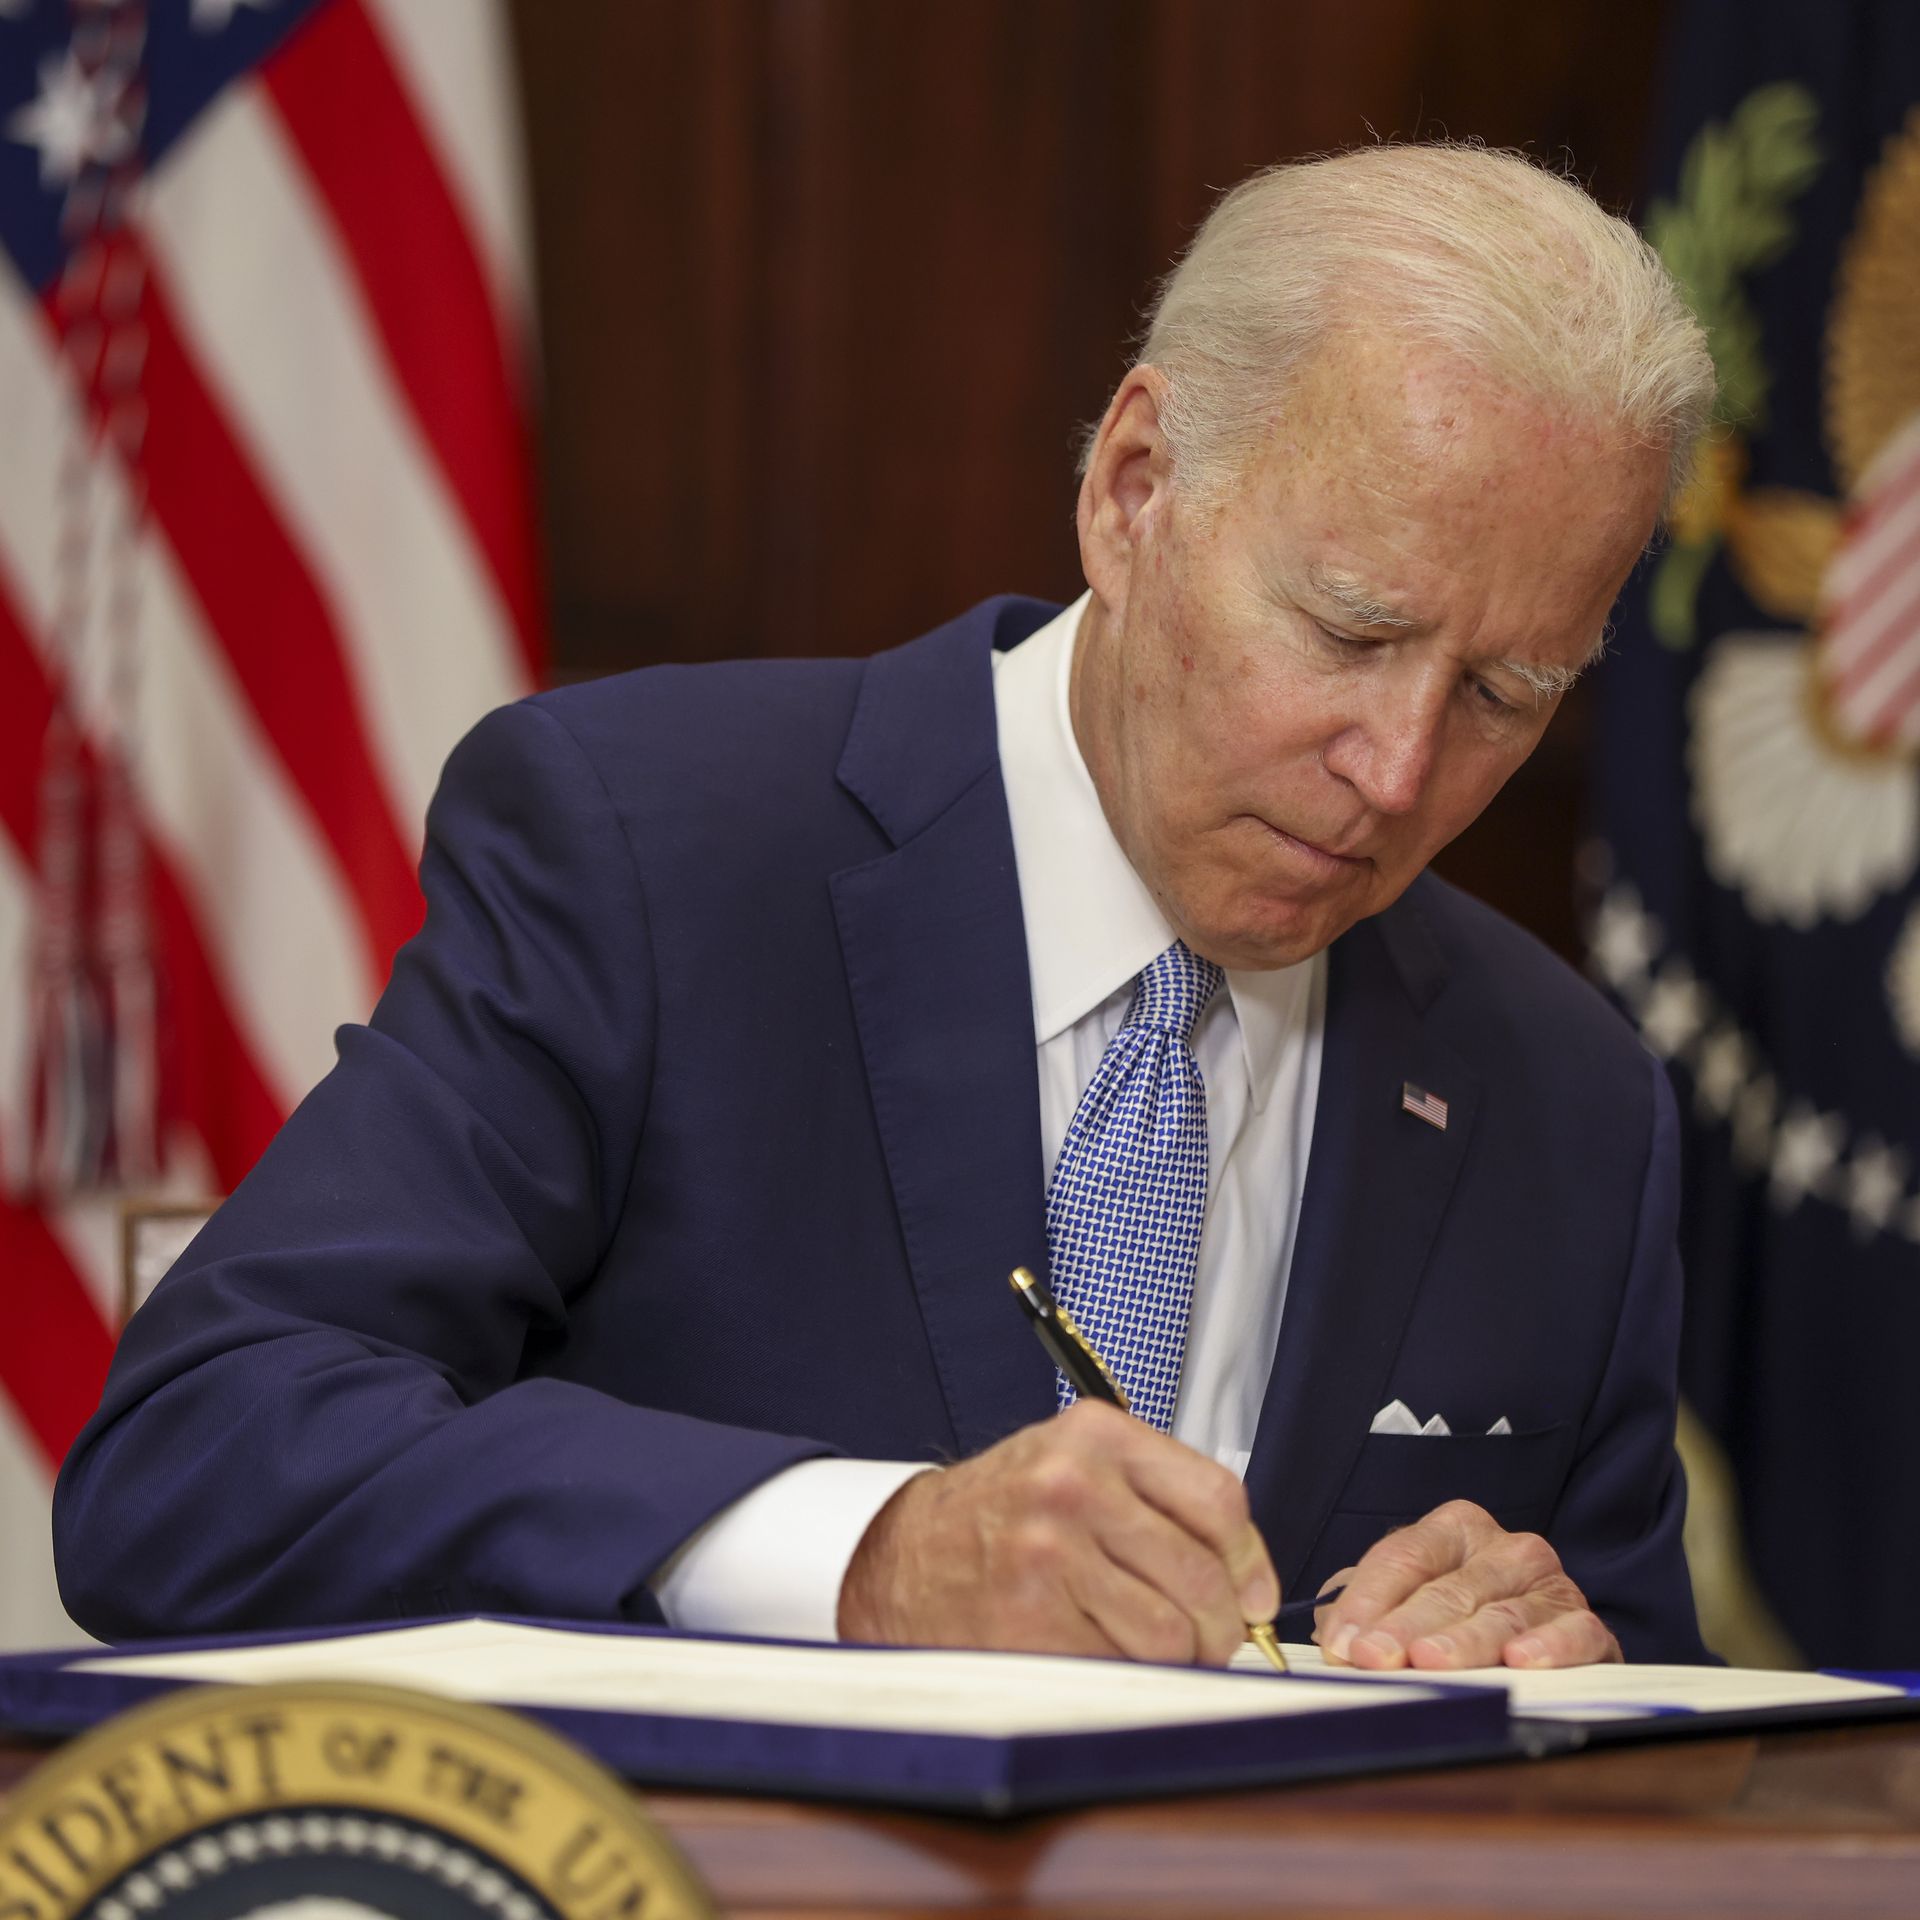 President Biden signing some papers in front of a flag